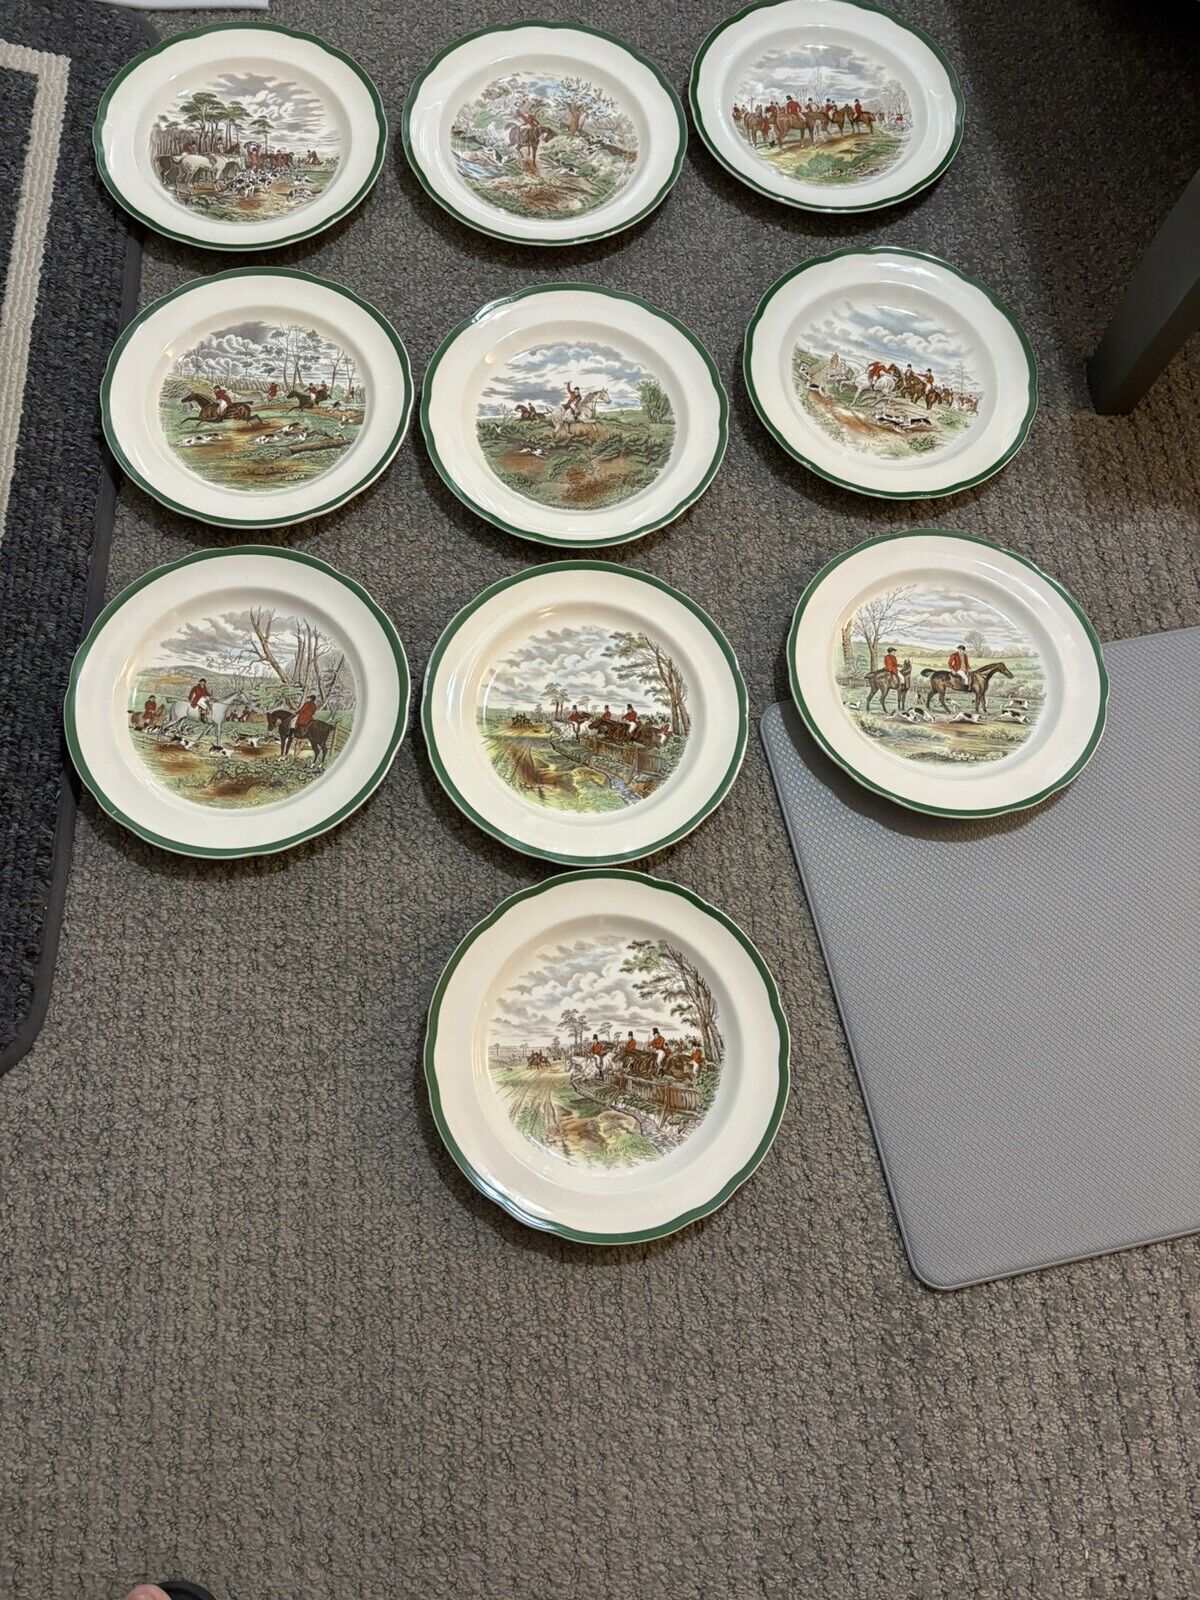 10 DINNER PLATES ~ SPODE, THE HUNT PATTERN ~ FINE CHINA